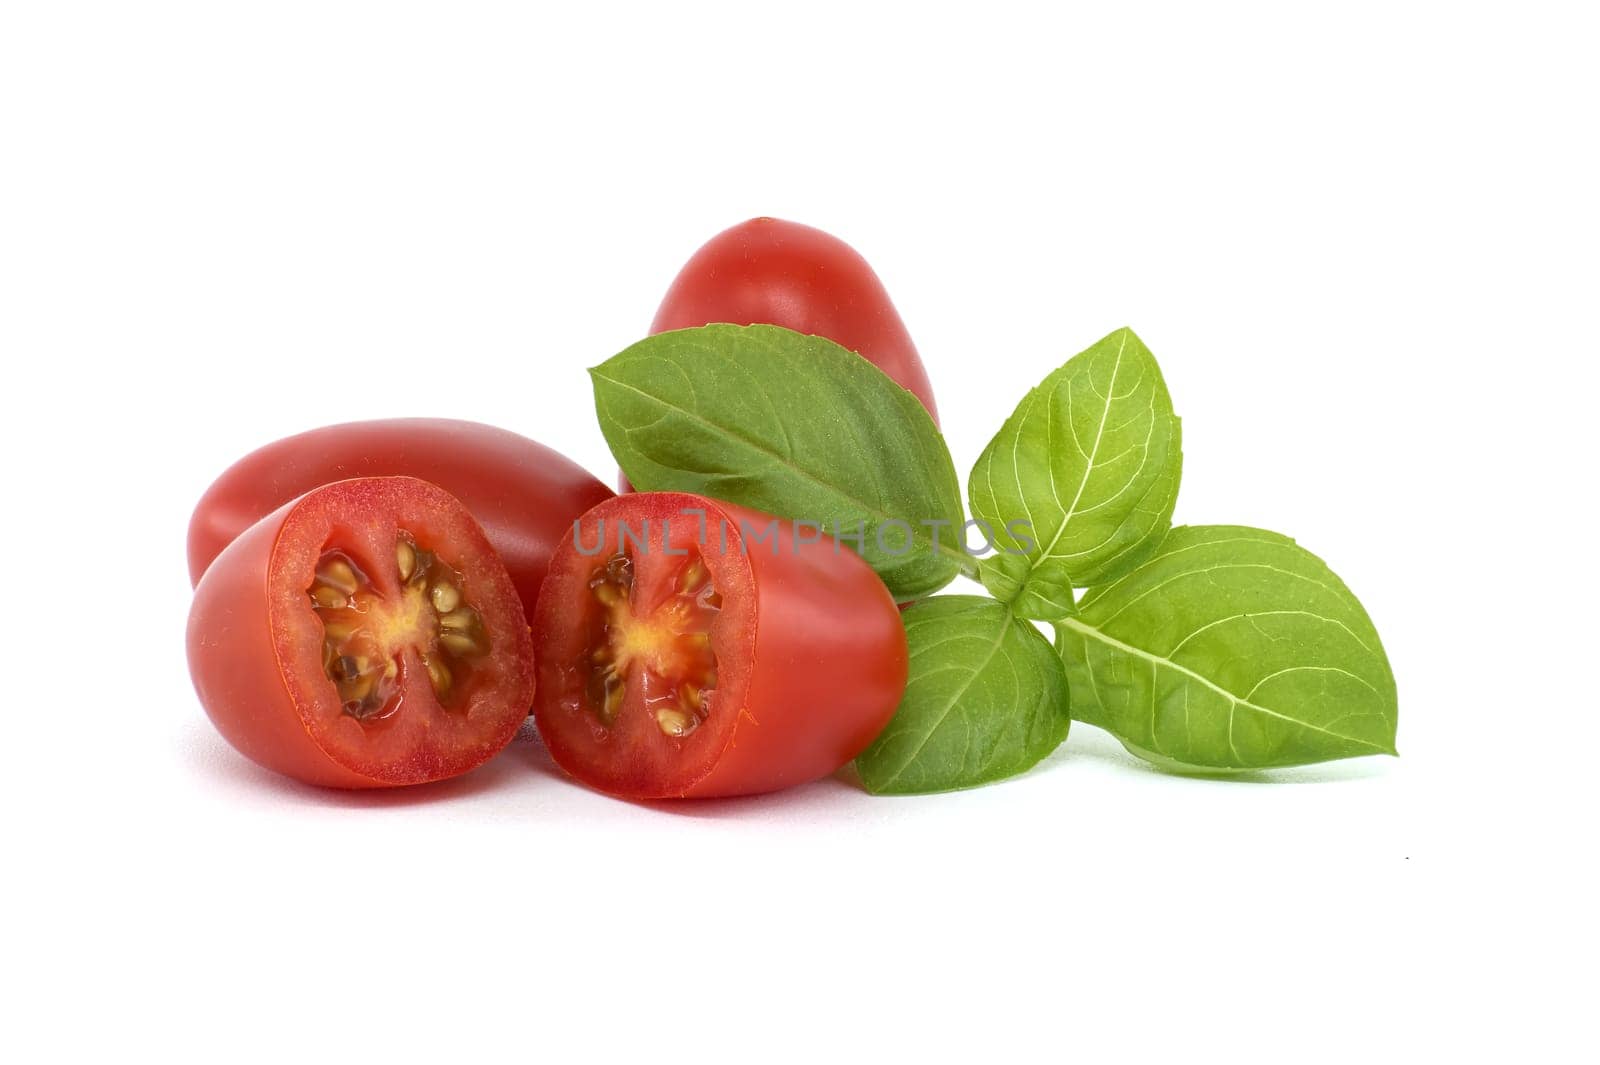 Close-up of fresh Roma tomatoes, including halved ones, alongside basil leaves on a white background. Perfect for illustrating healthy eating and fresh ingredients.